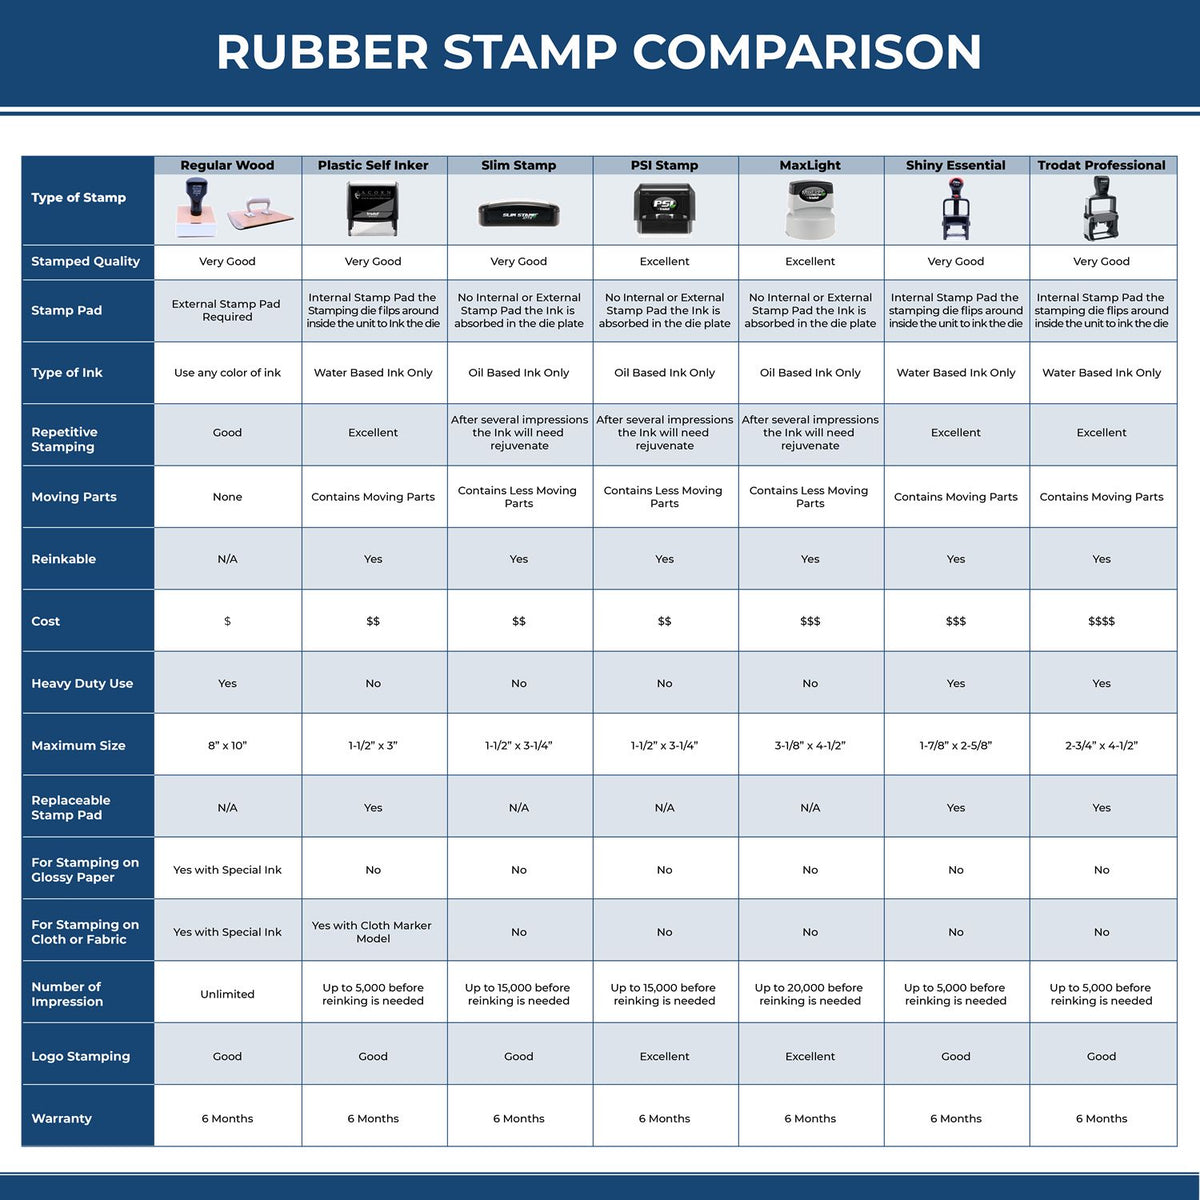 Large Escrow Account Rubber Stamp 4593R Rubber Stamp Comparison